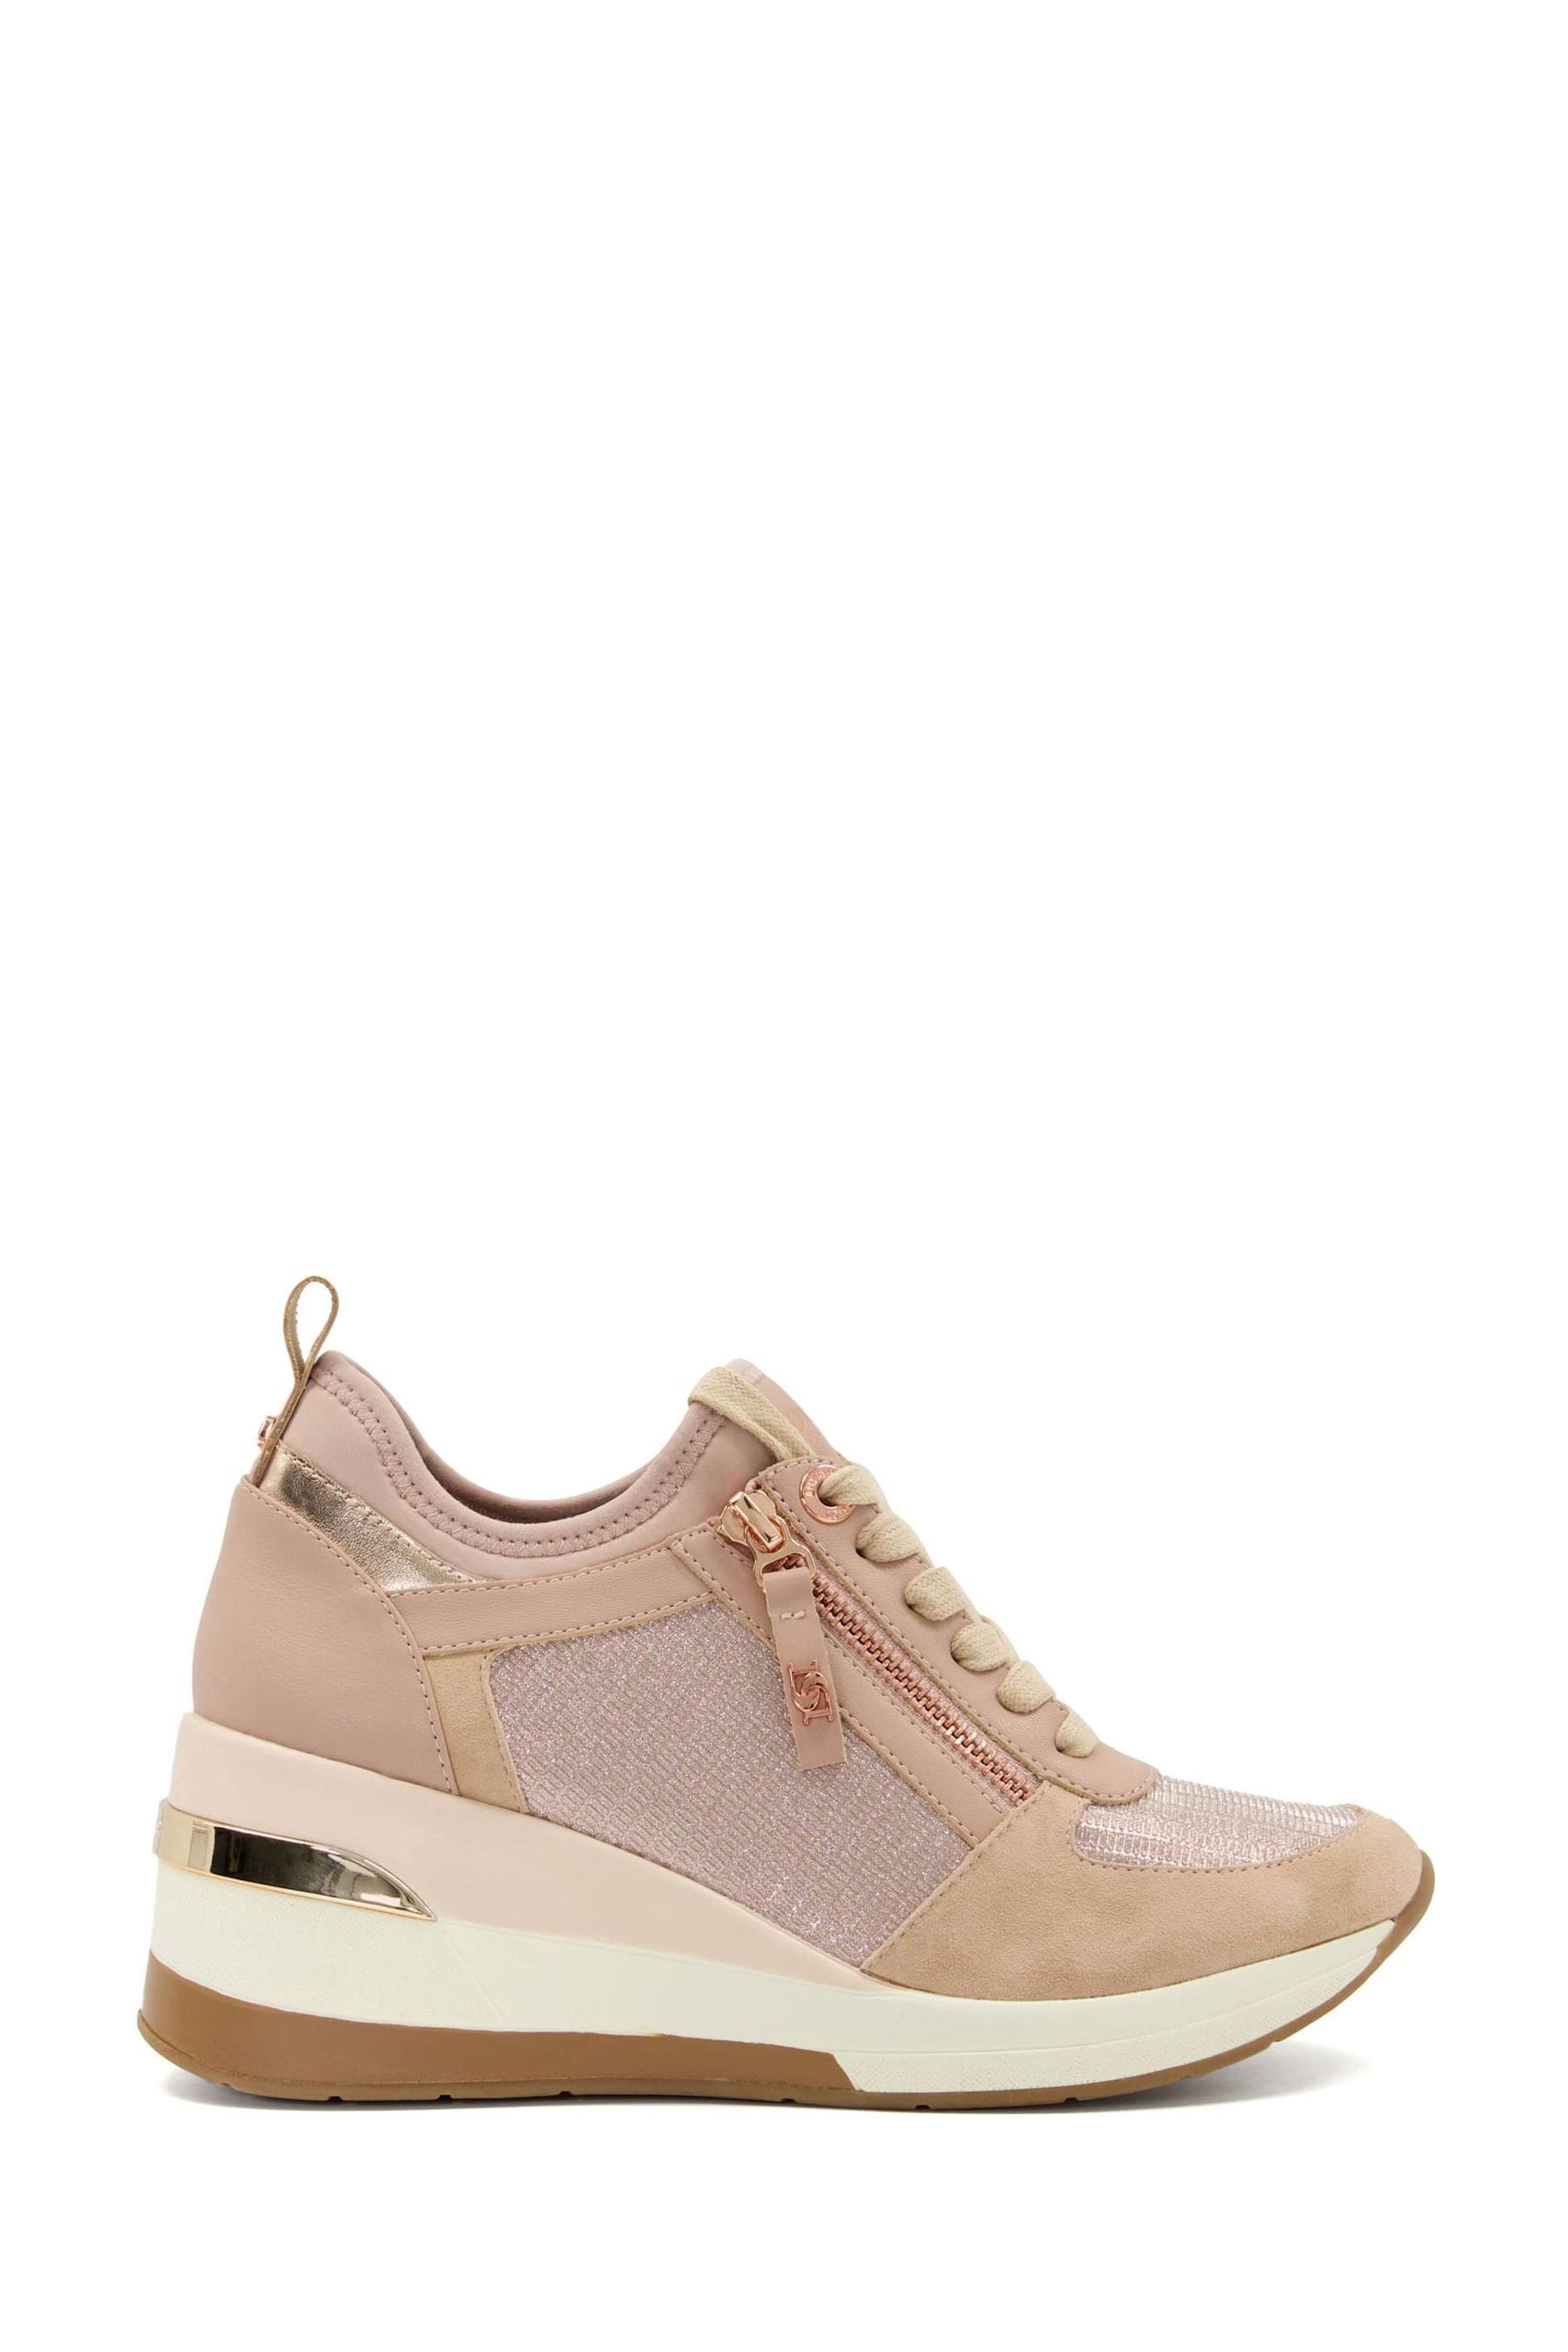 Buy Dune London Gold Eilin Zip Detail Wedge Trainers from the Next UK ...